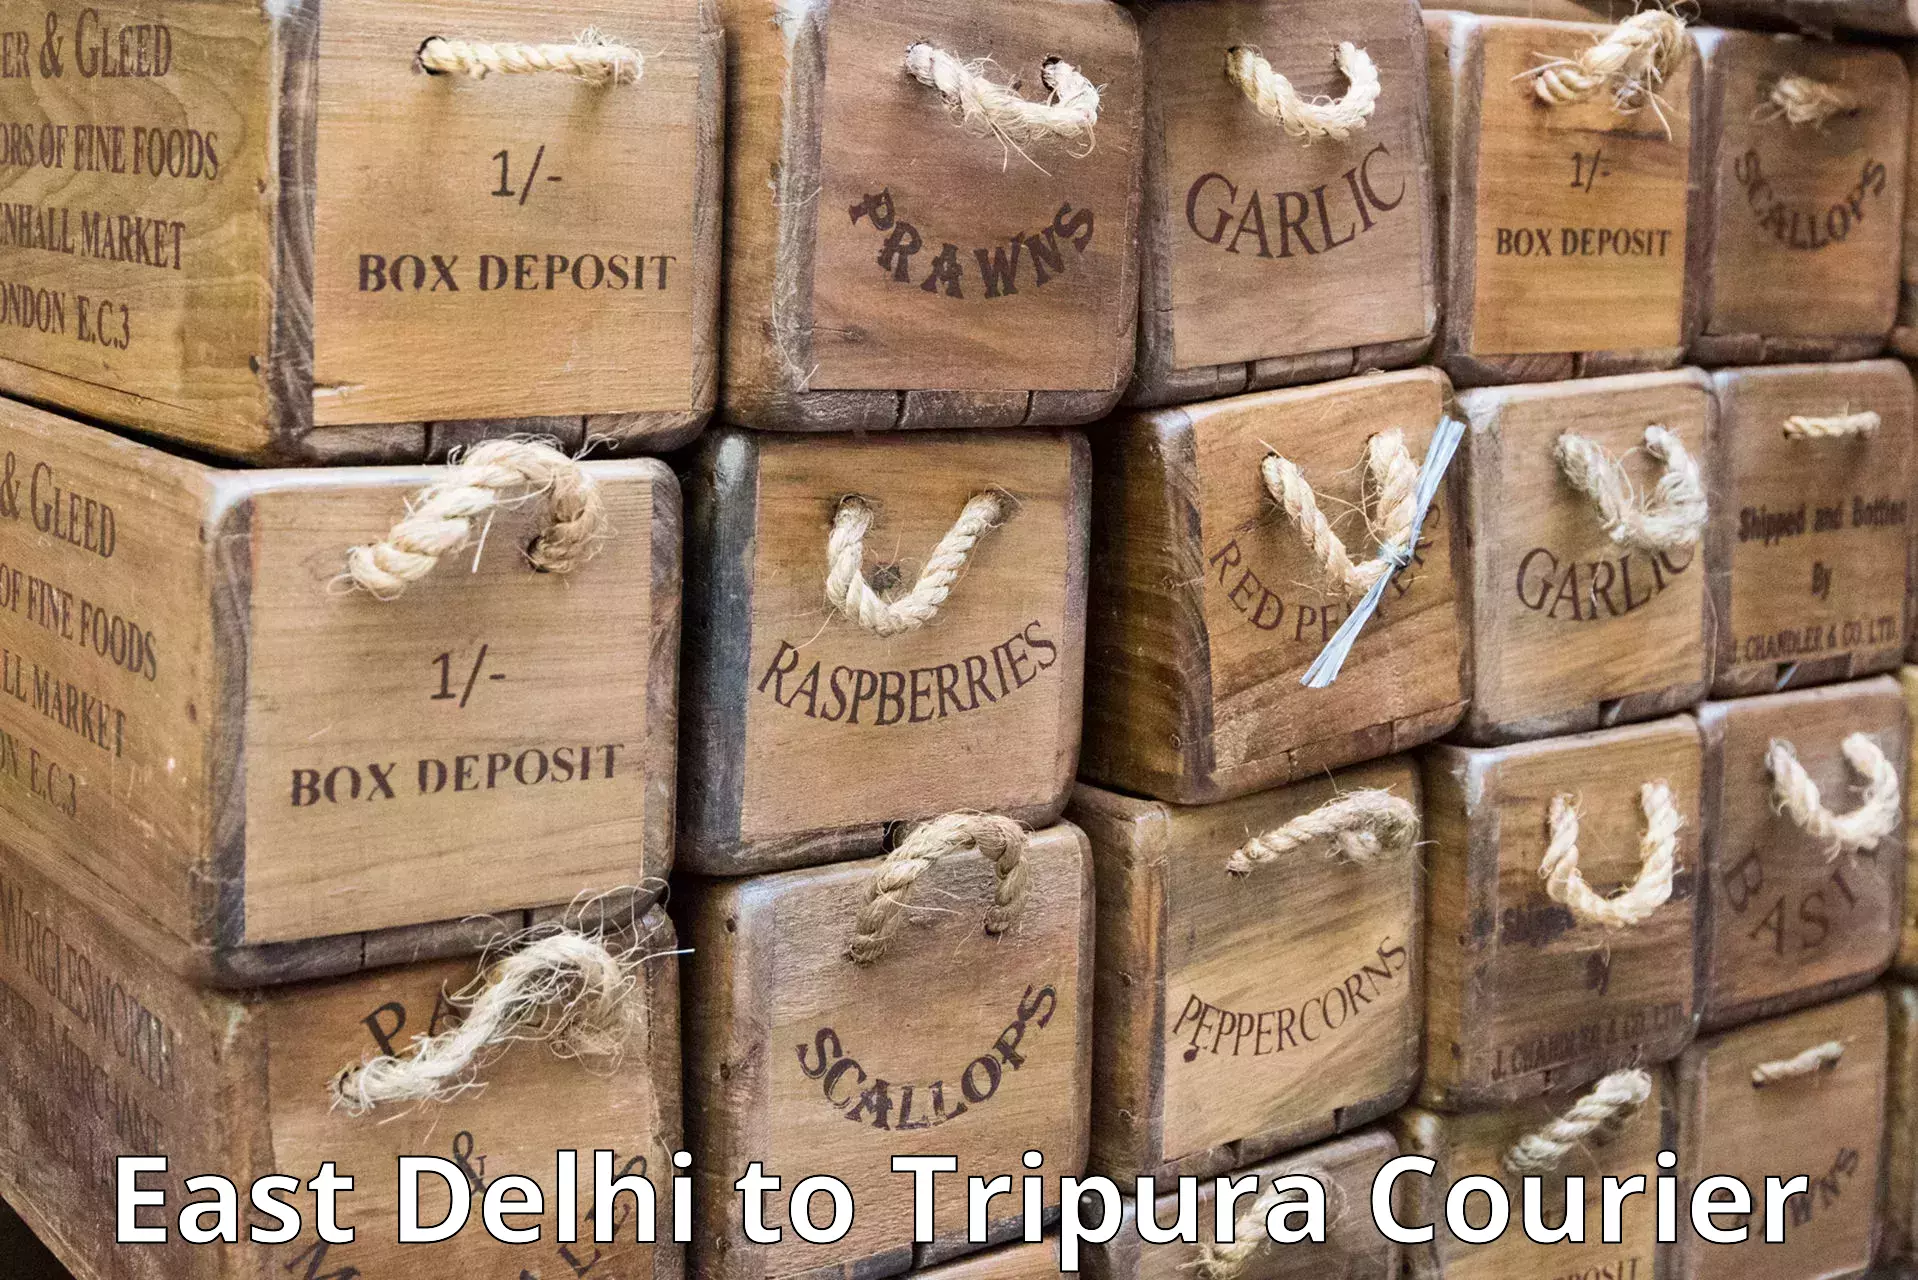 Large package courier in East Delhi to Udaipur Tripura